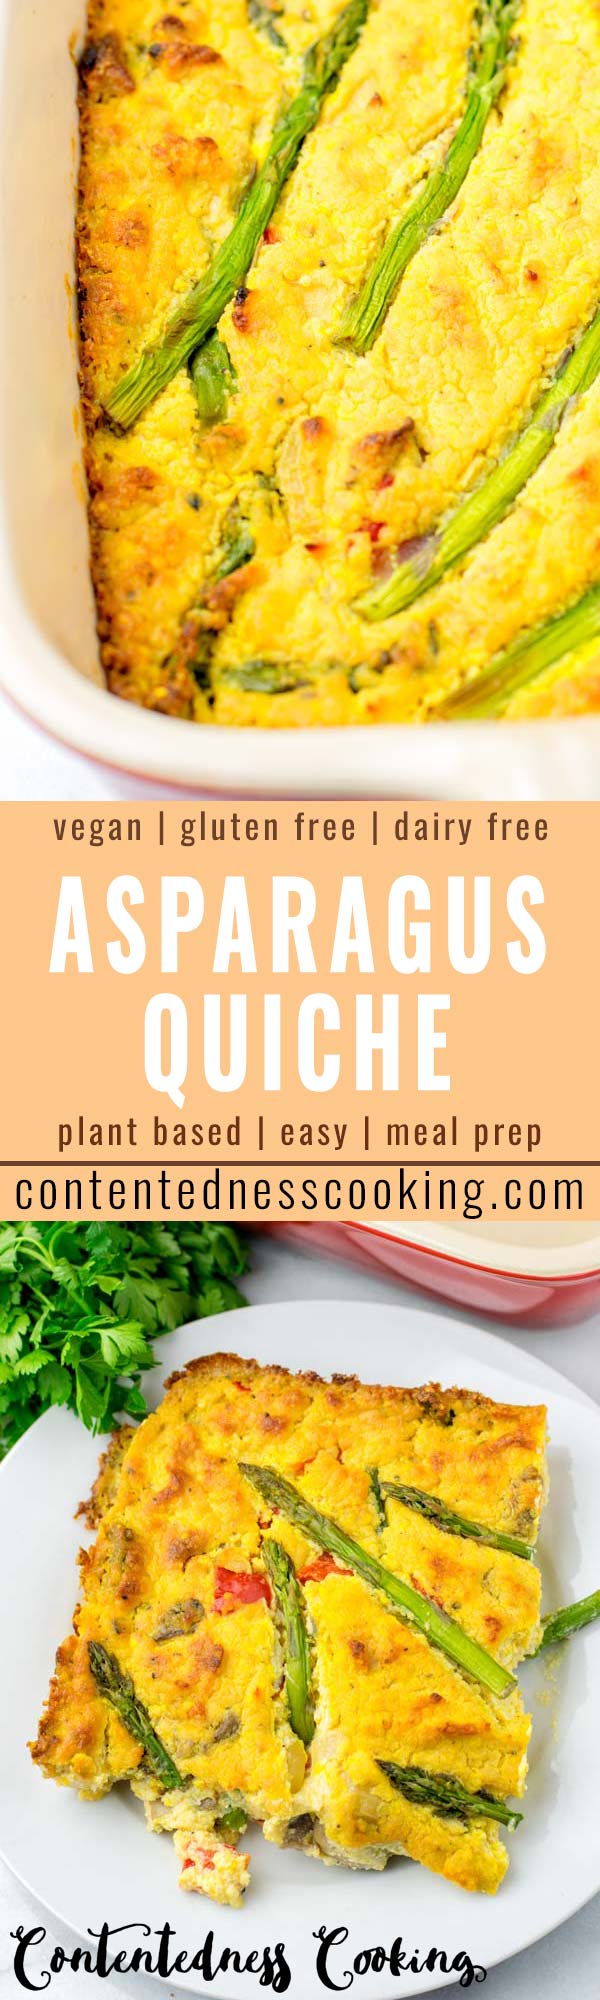 This Asparagus Quiche is super easy to make and so delicious. No one would ever guess it is vegan, a keeper made with simple vegetables and amazing seasoning that the whole family will love. #vegan #dairyfree #glutenfree #vegetarian #asparagusquiche #asparagusquichecrustless #dinner #lunch #mealprep #contentednesscooking #comfortfood #familydinnerideas #worklunchideas #picnicfoodideas 